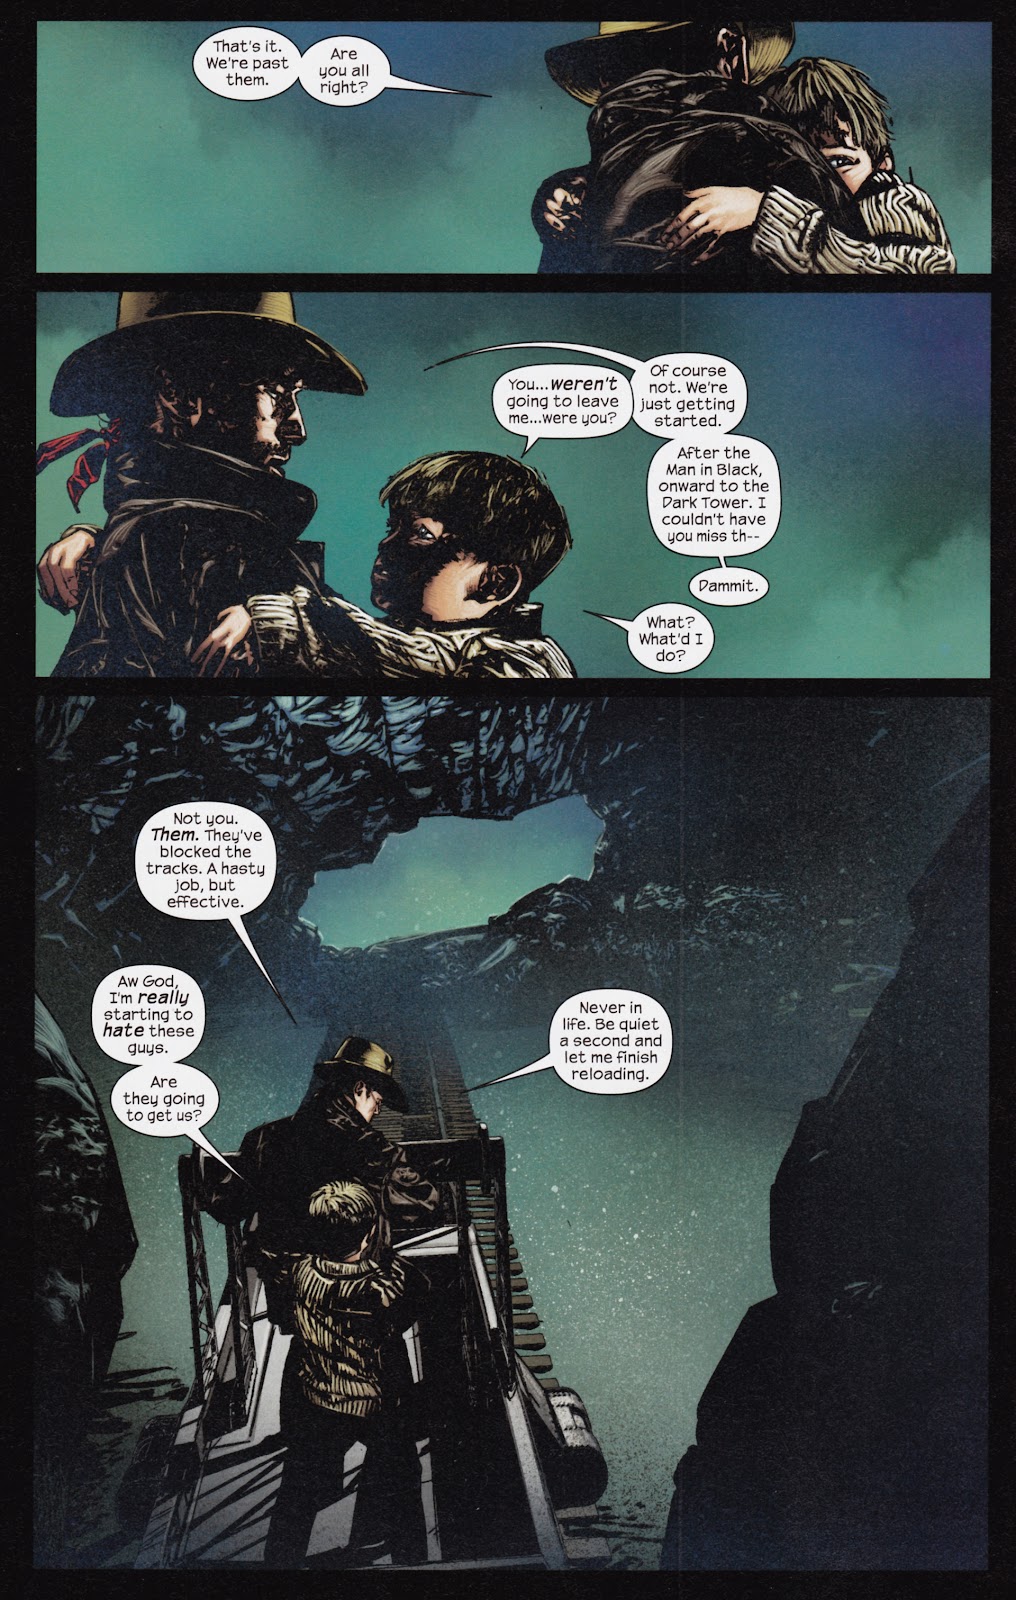 Dark Tower: The Gunslinger - The Man in Black issue 3 - Page 9